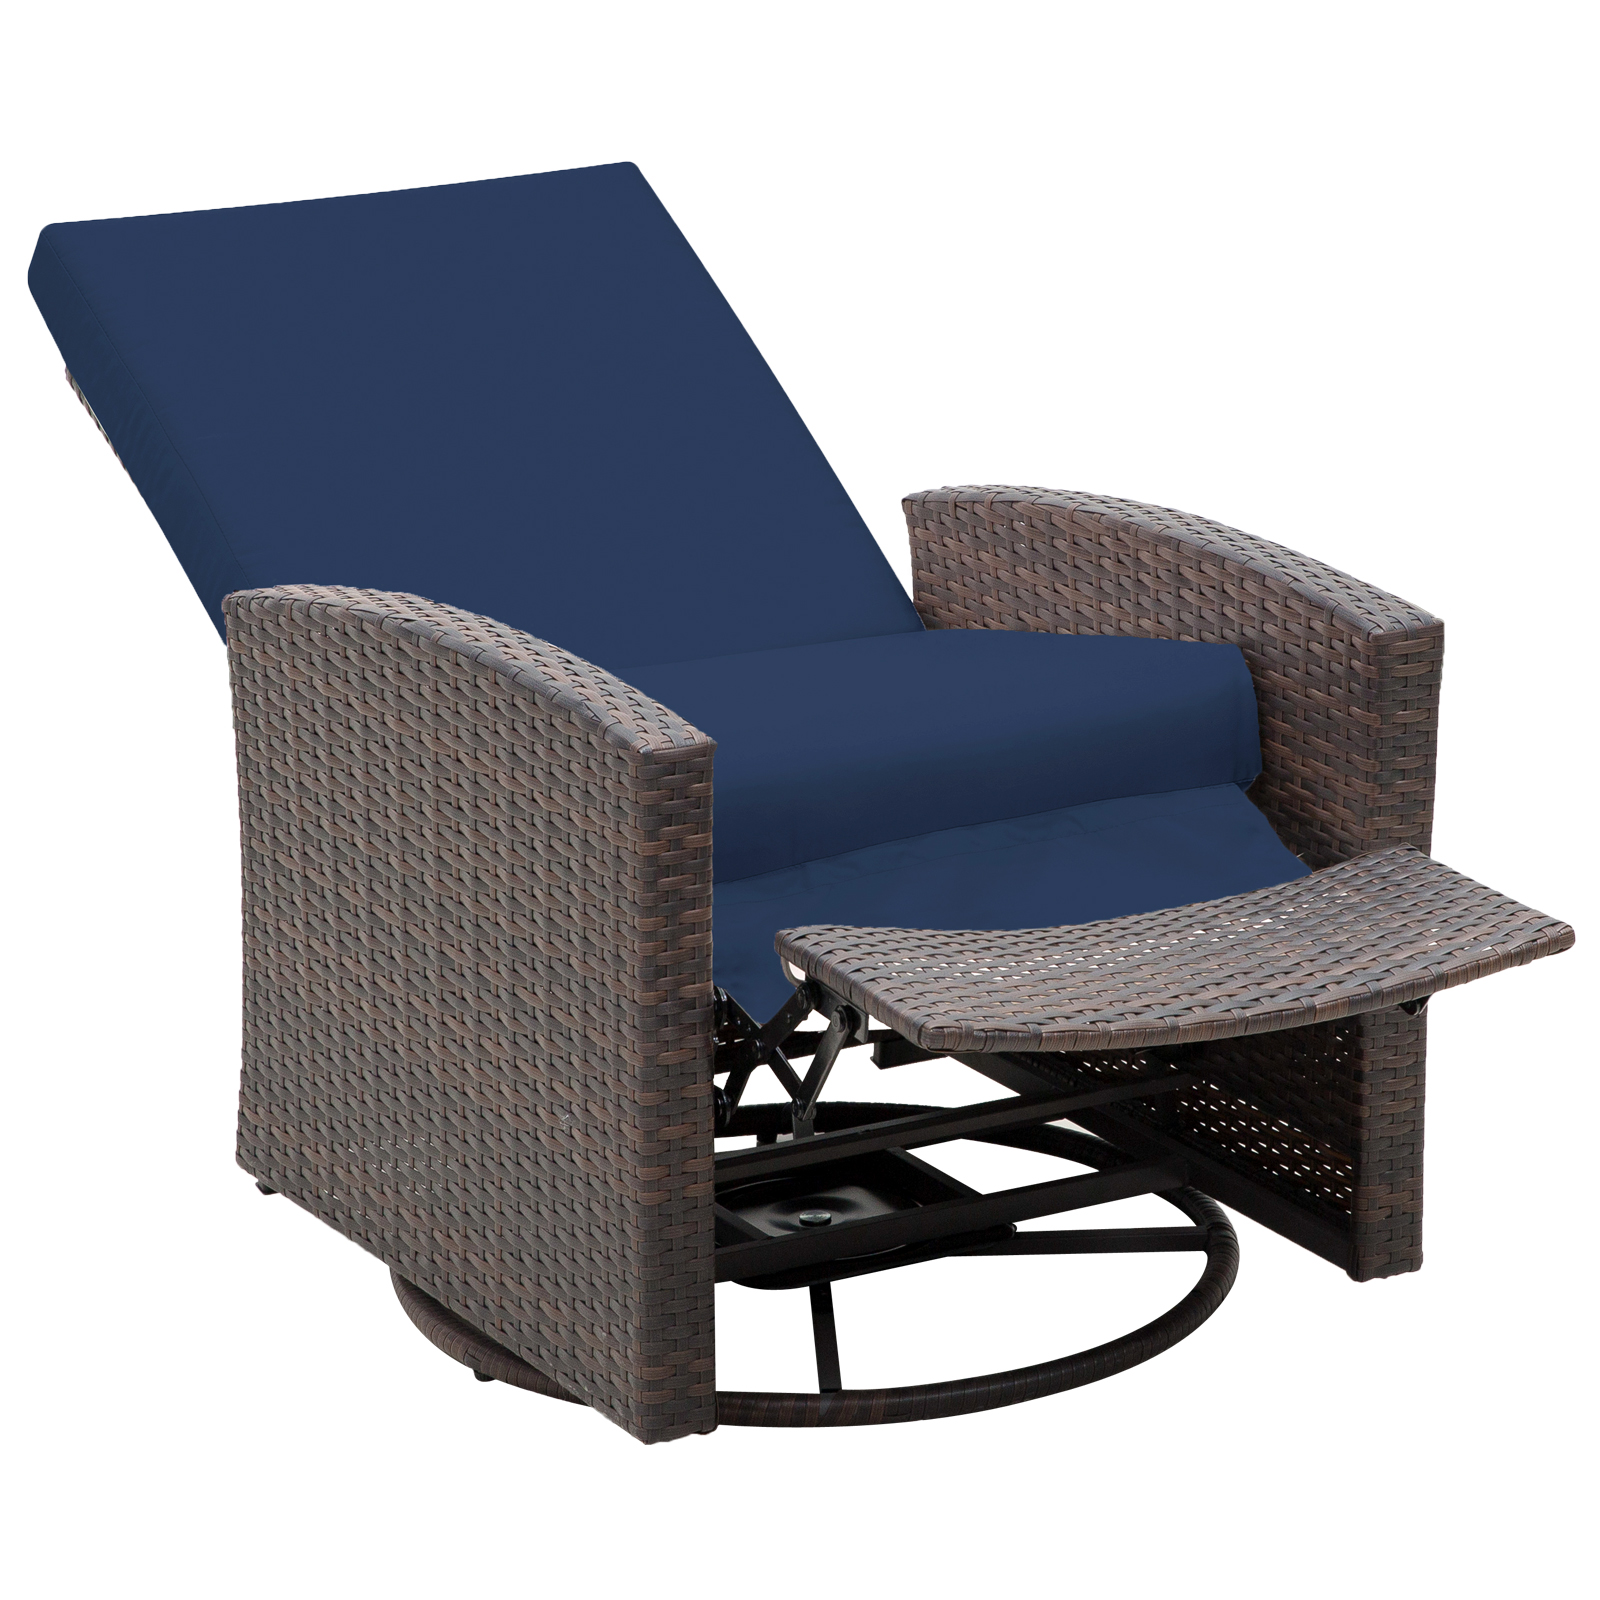 Outsunny Outdoor Wicker Swivel Recliner Chair, Reclining Backrest, Lifting Footrest, 360 Rotating Basic, Water Resistant Cushions for Patio, Dark Blue - image 1 of 2